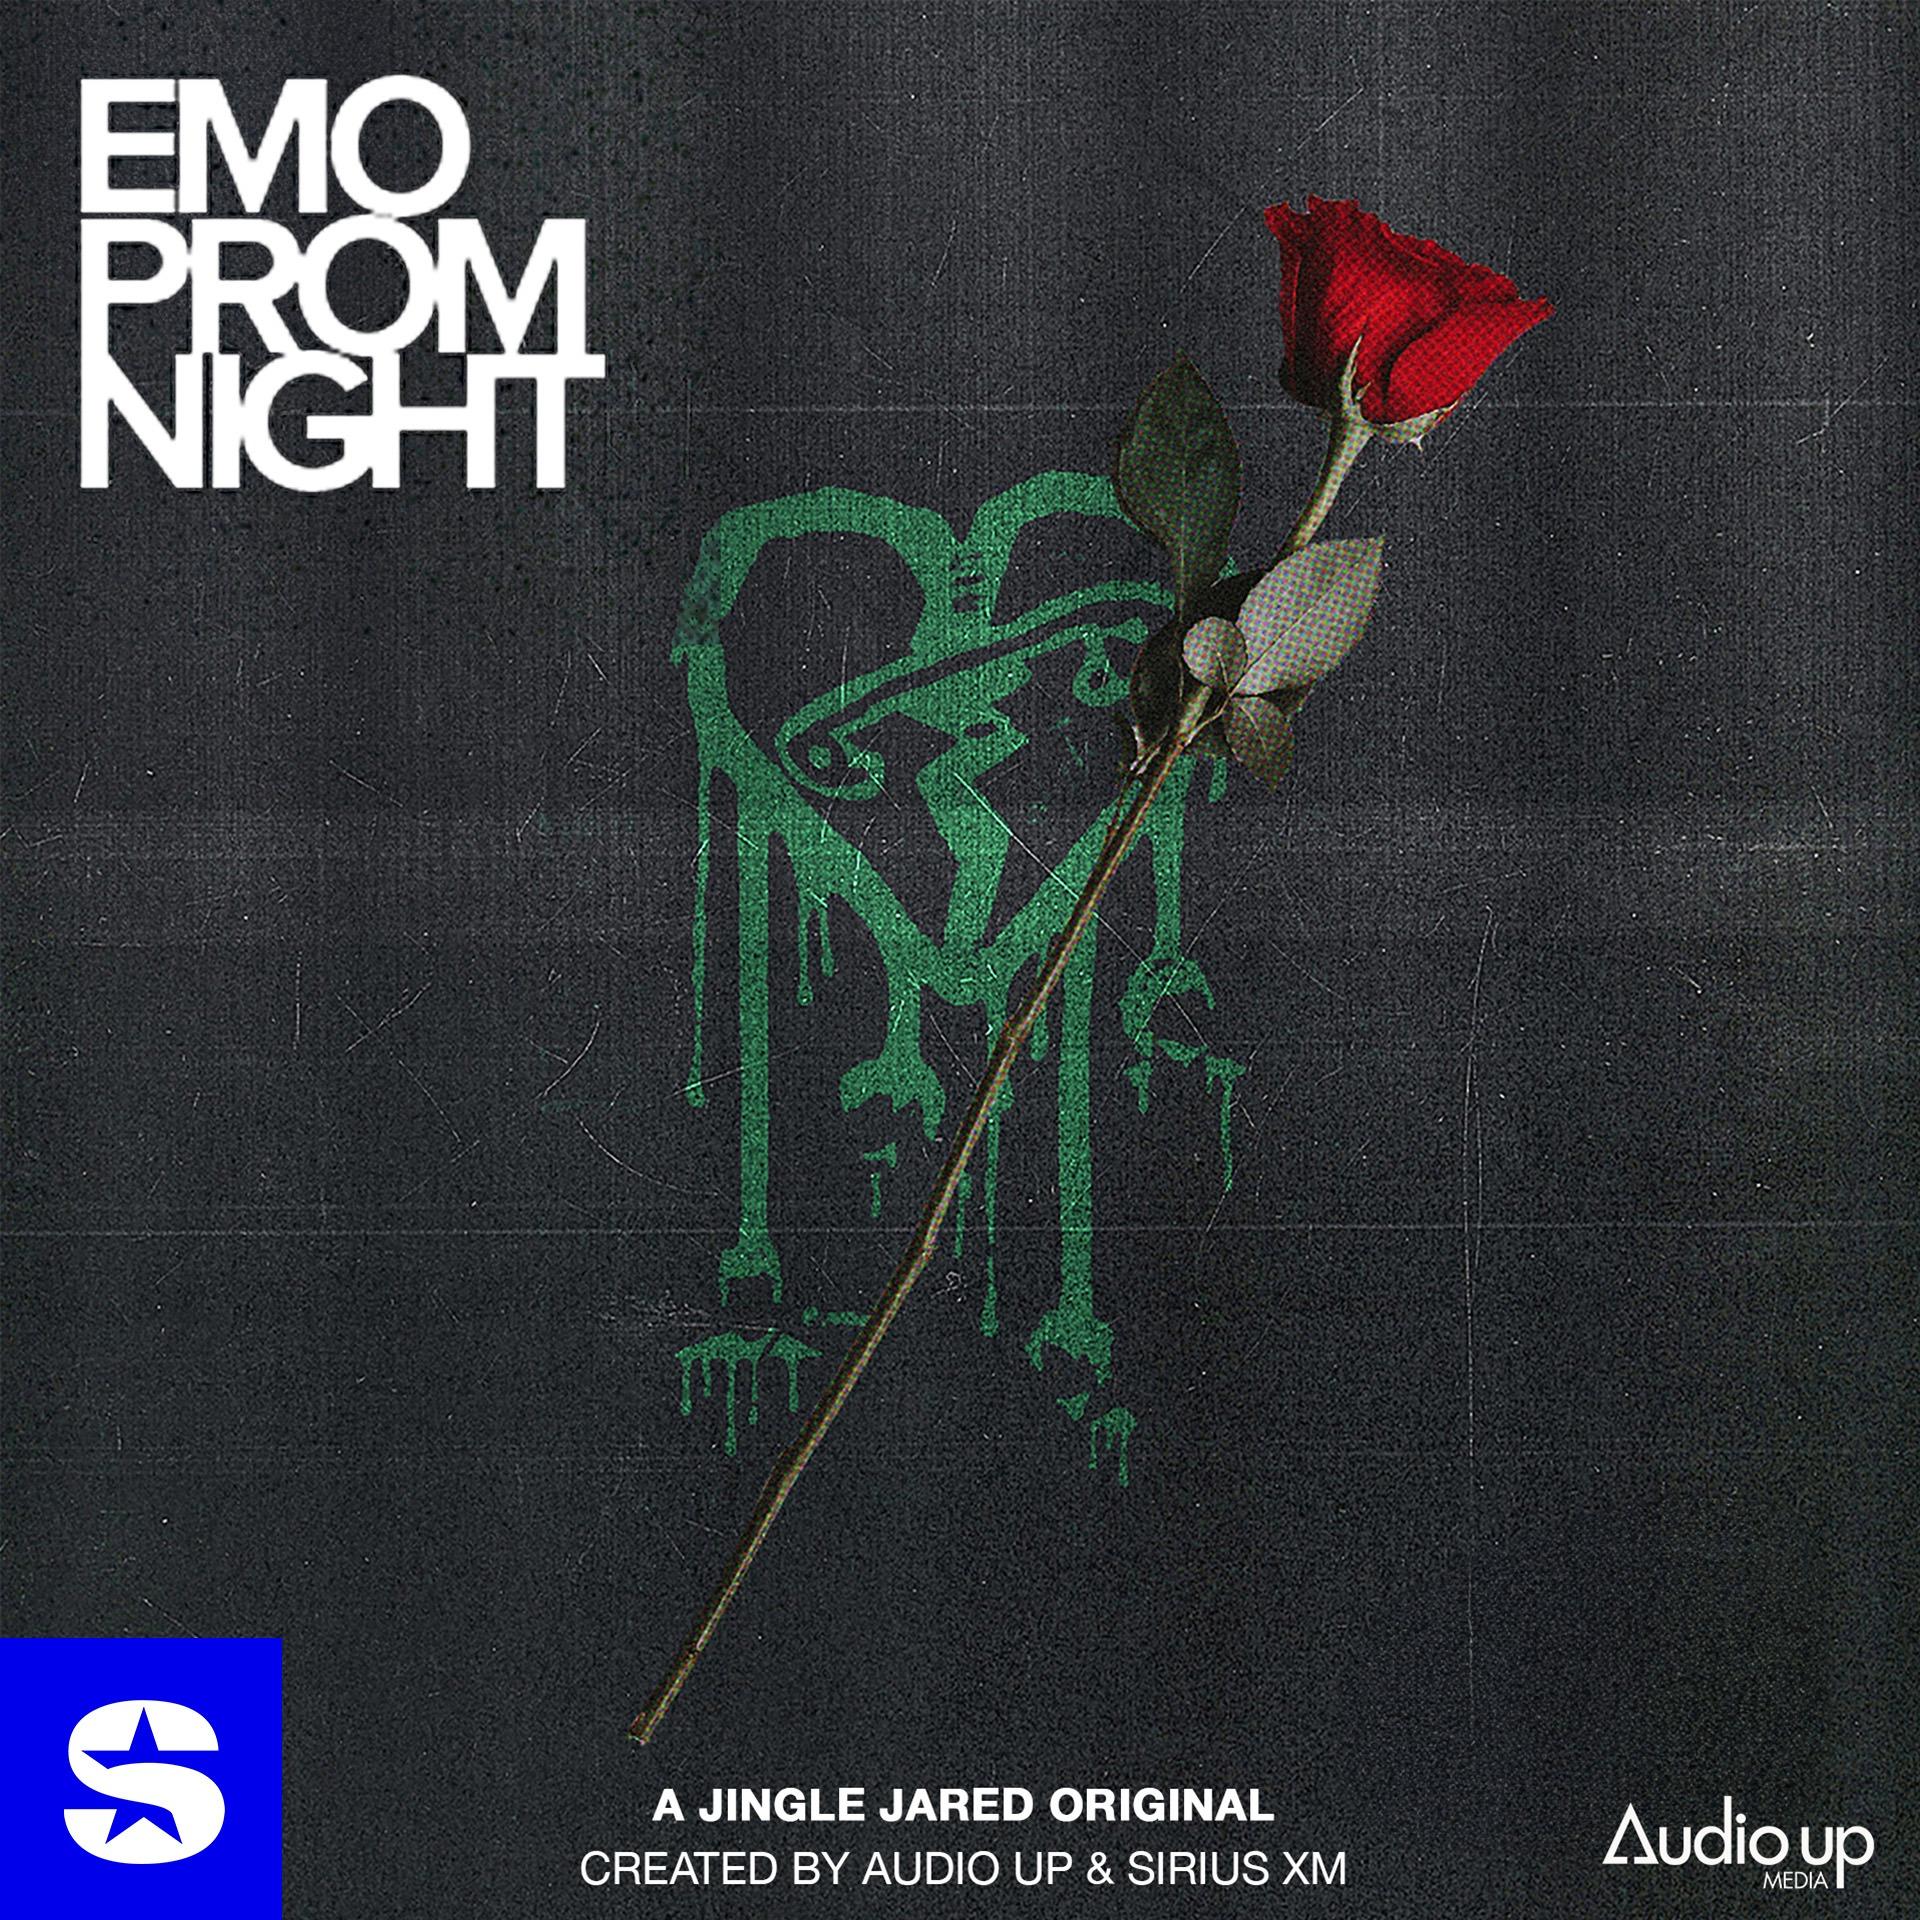 Show poster of Emo Prom Night